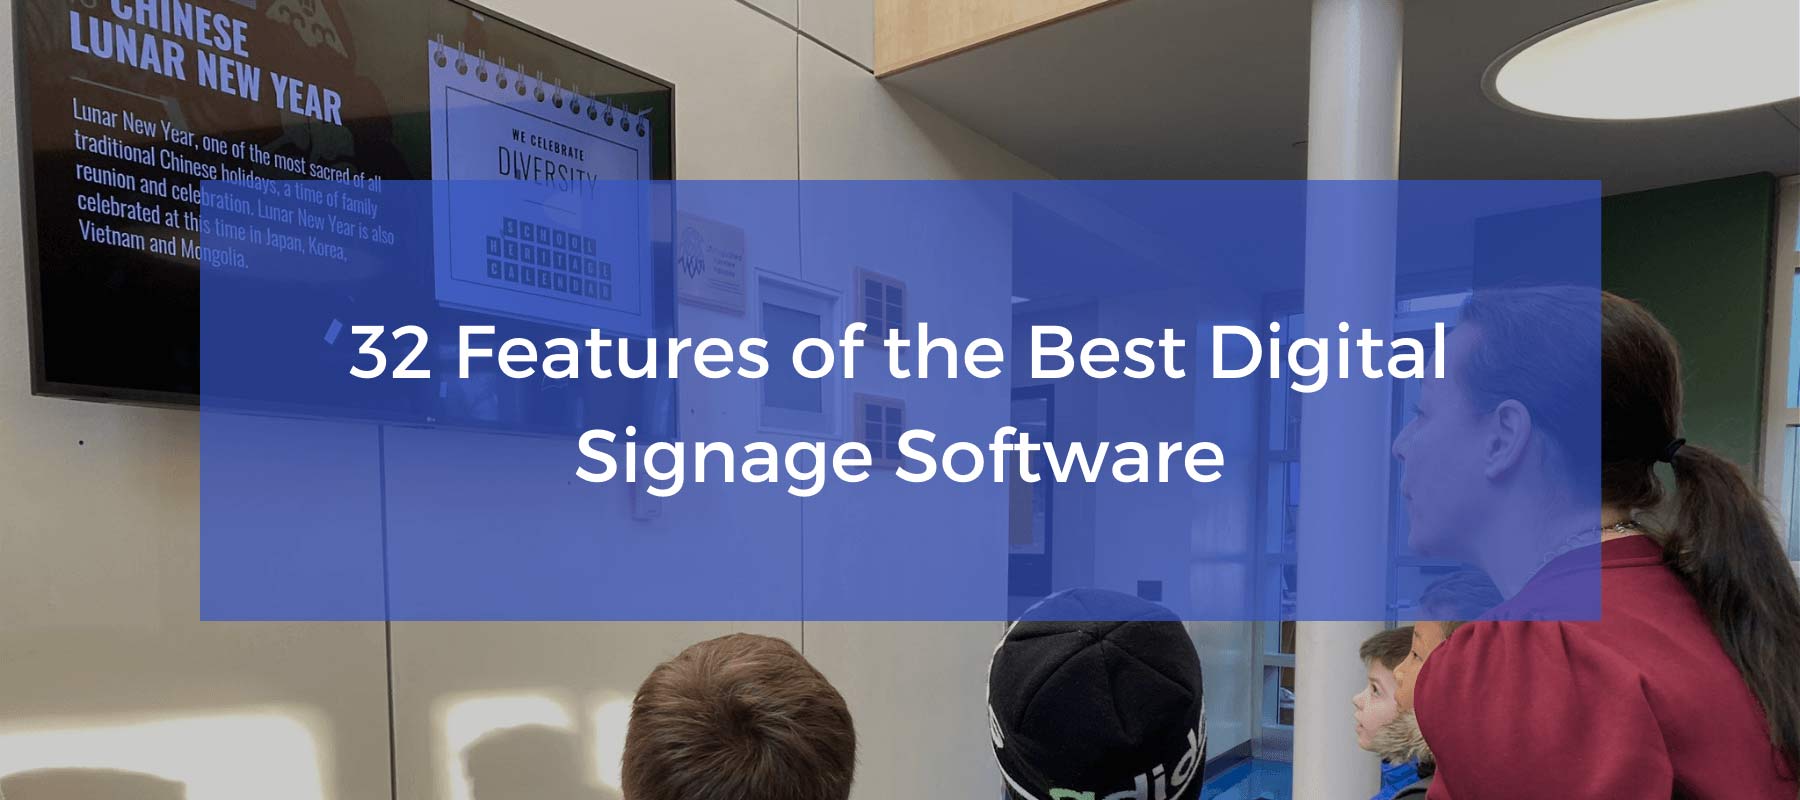 32 Features of the Best Digital Signage Software